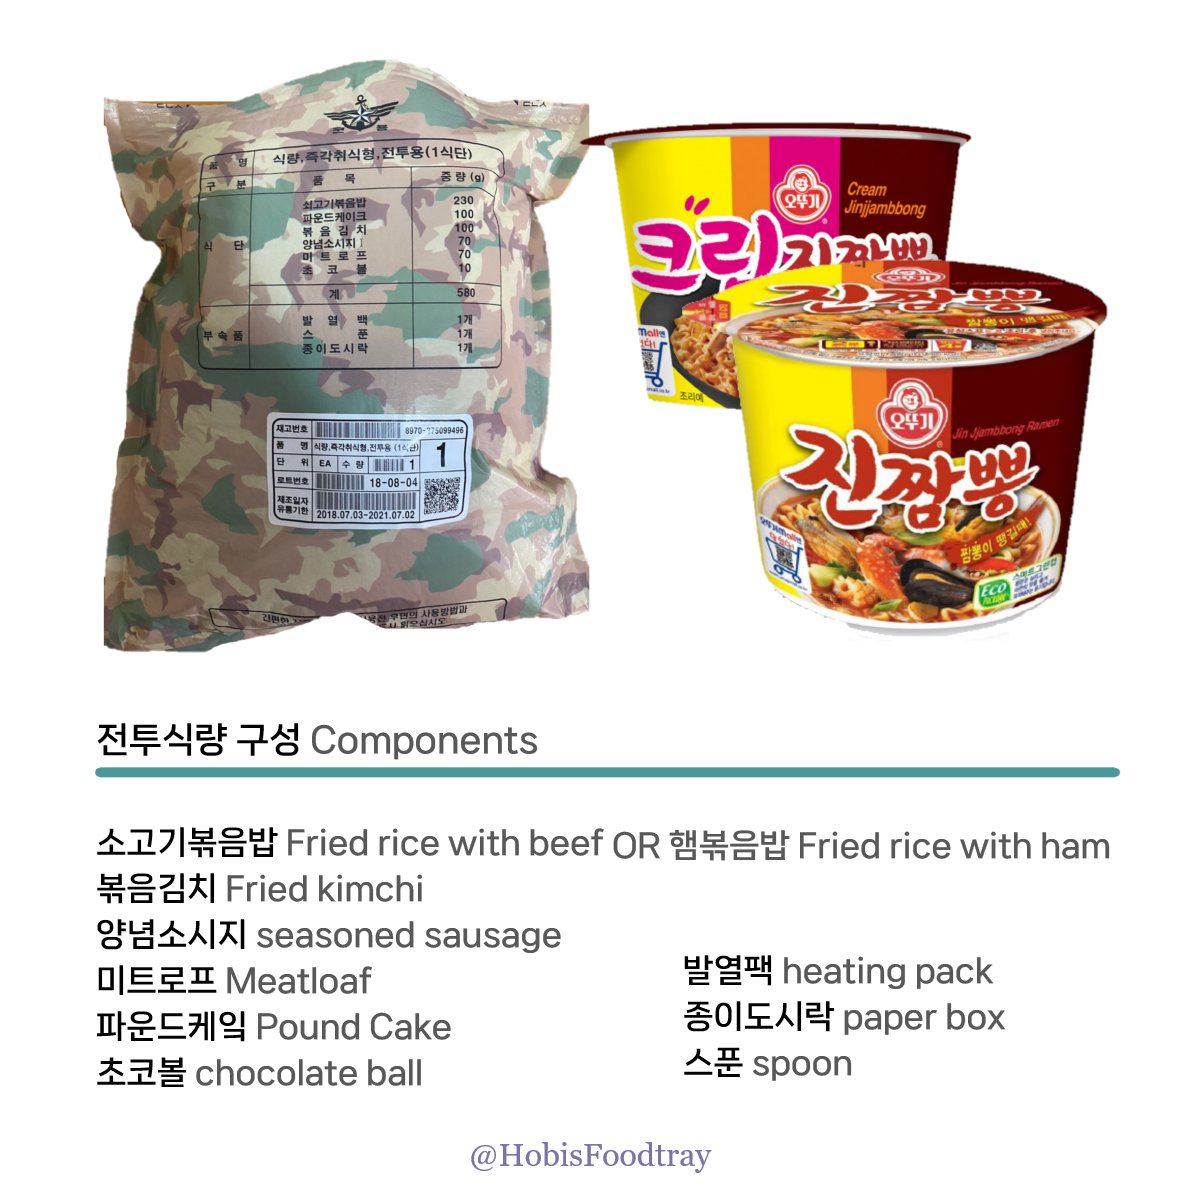 D-484
230621(Wed)

🥢석식Dinner

전투식량 Combat ration
오뚜기 진짬뽕 instant cup ramen

🔊Combat rations in the menu can be seen as part of the military training course

#Jhope #정호석 #Hobisfoodtray